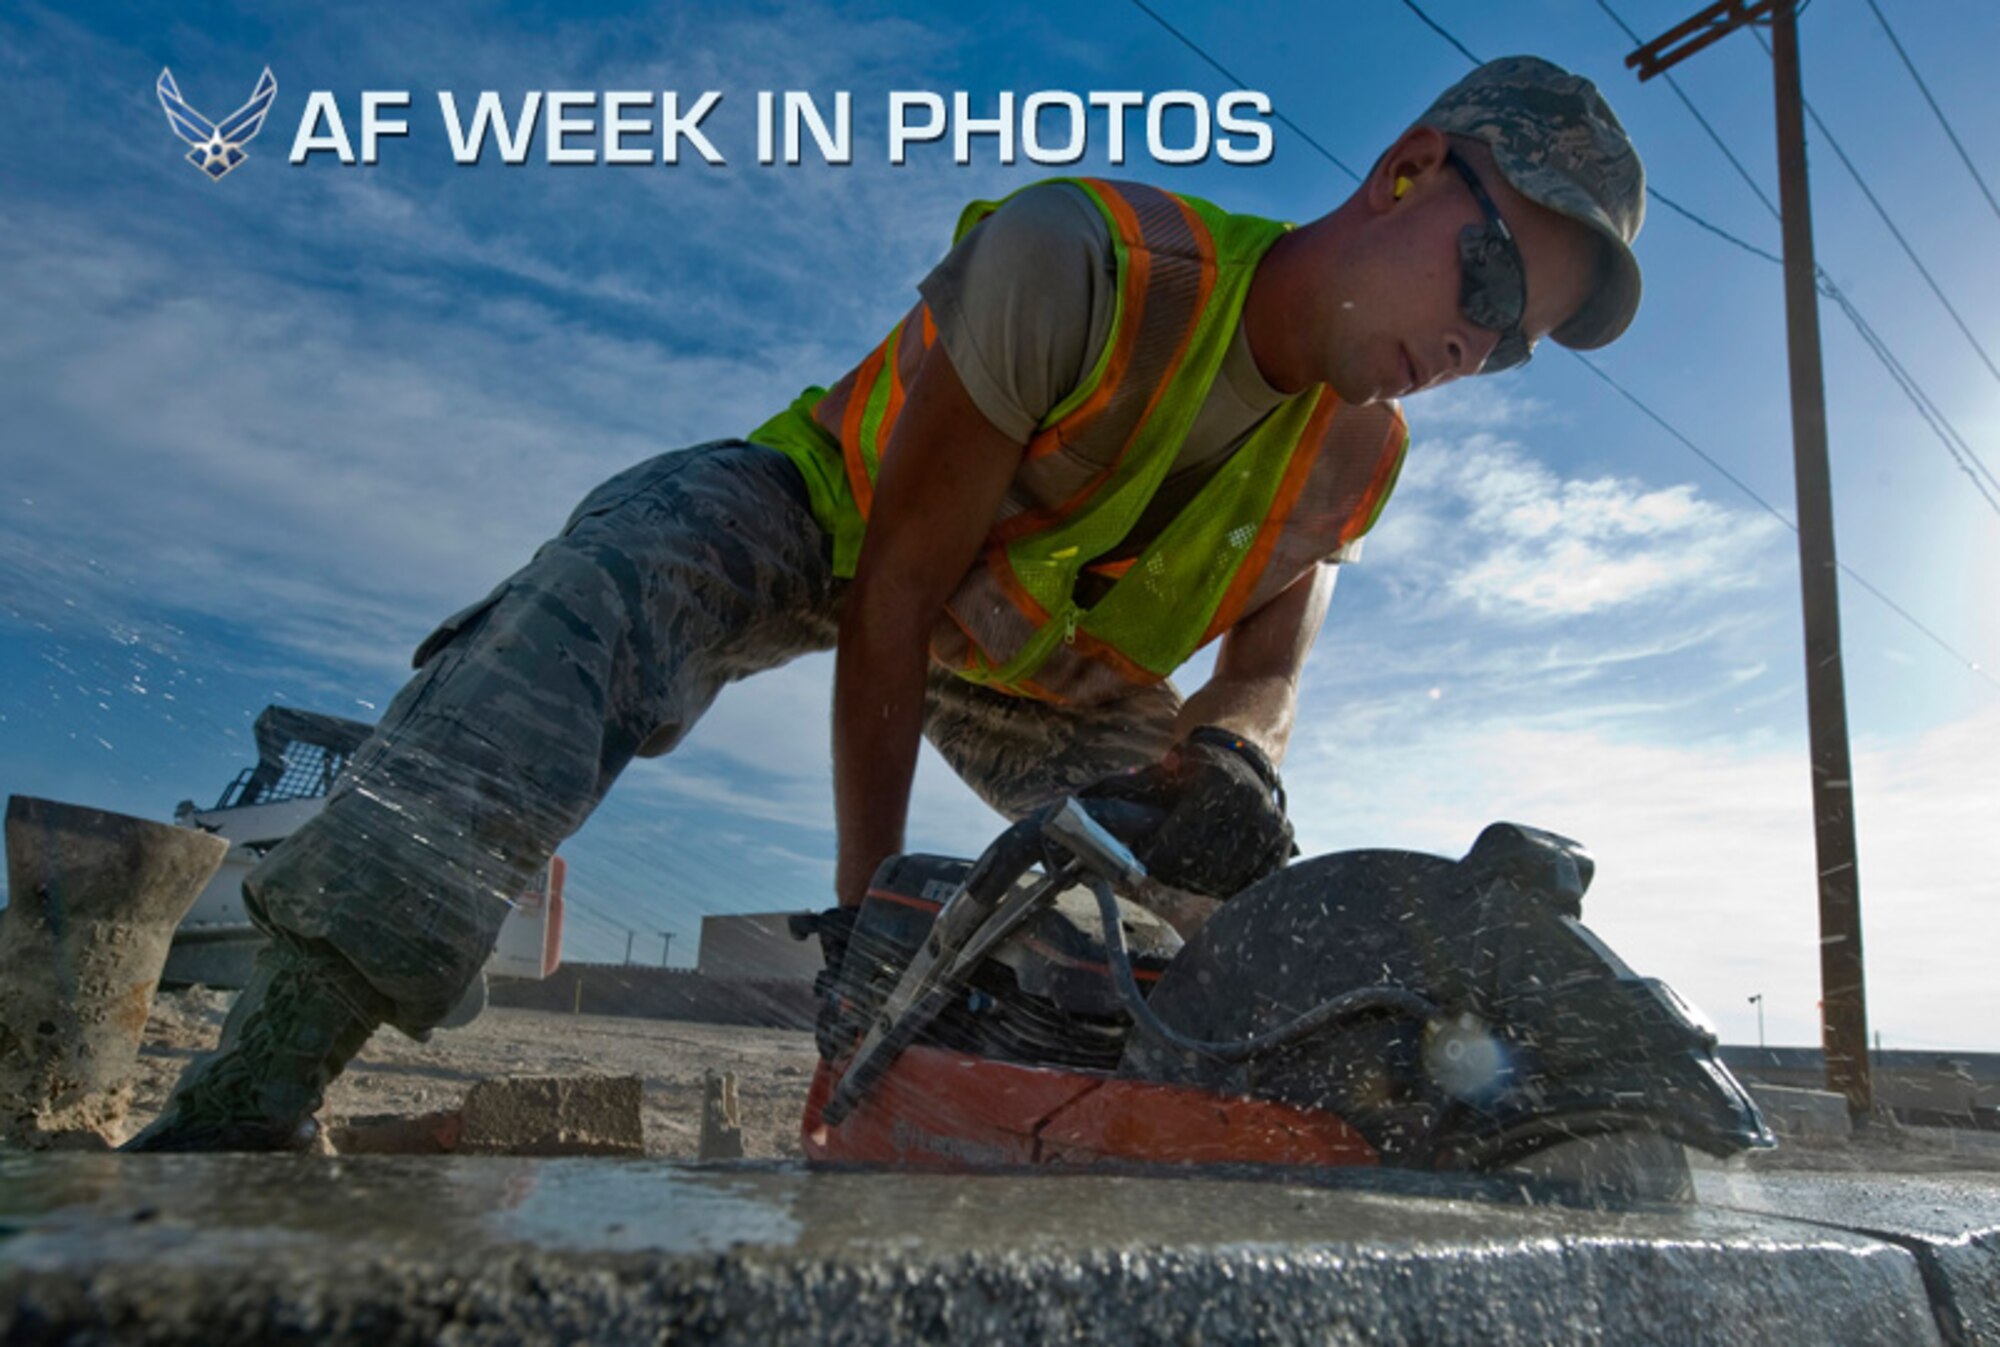 Senior Airman Andrew Higginbotham uses a concrete saw to cut out a piece of curb during the construction of a parking lot at Nellis Air Force Base, Nev., Aug.15, 2012. The parking lot will be a general parking lot for work centers around the area. Higginbotham is a 99th Civil Engineer Squadron heavy equipment and pavements journeyman. (U.S. Air Force photo/Airman 1st Class Daniel Hughes)